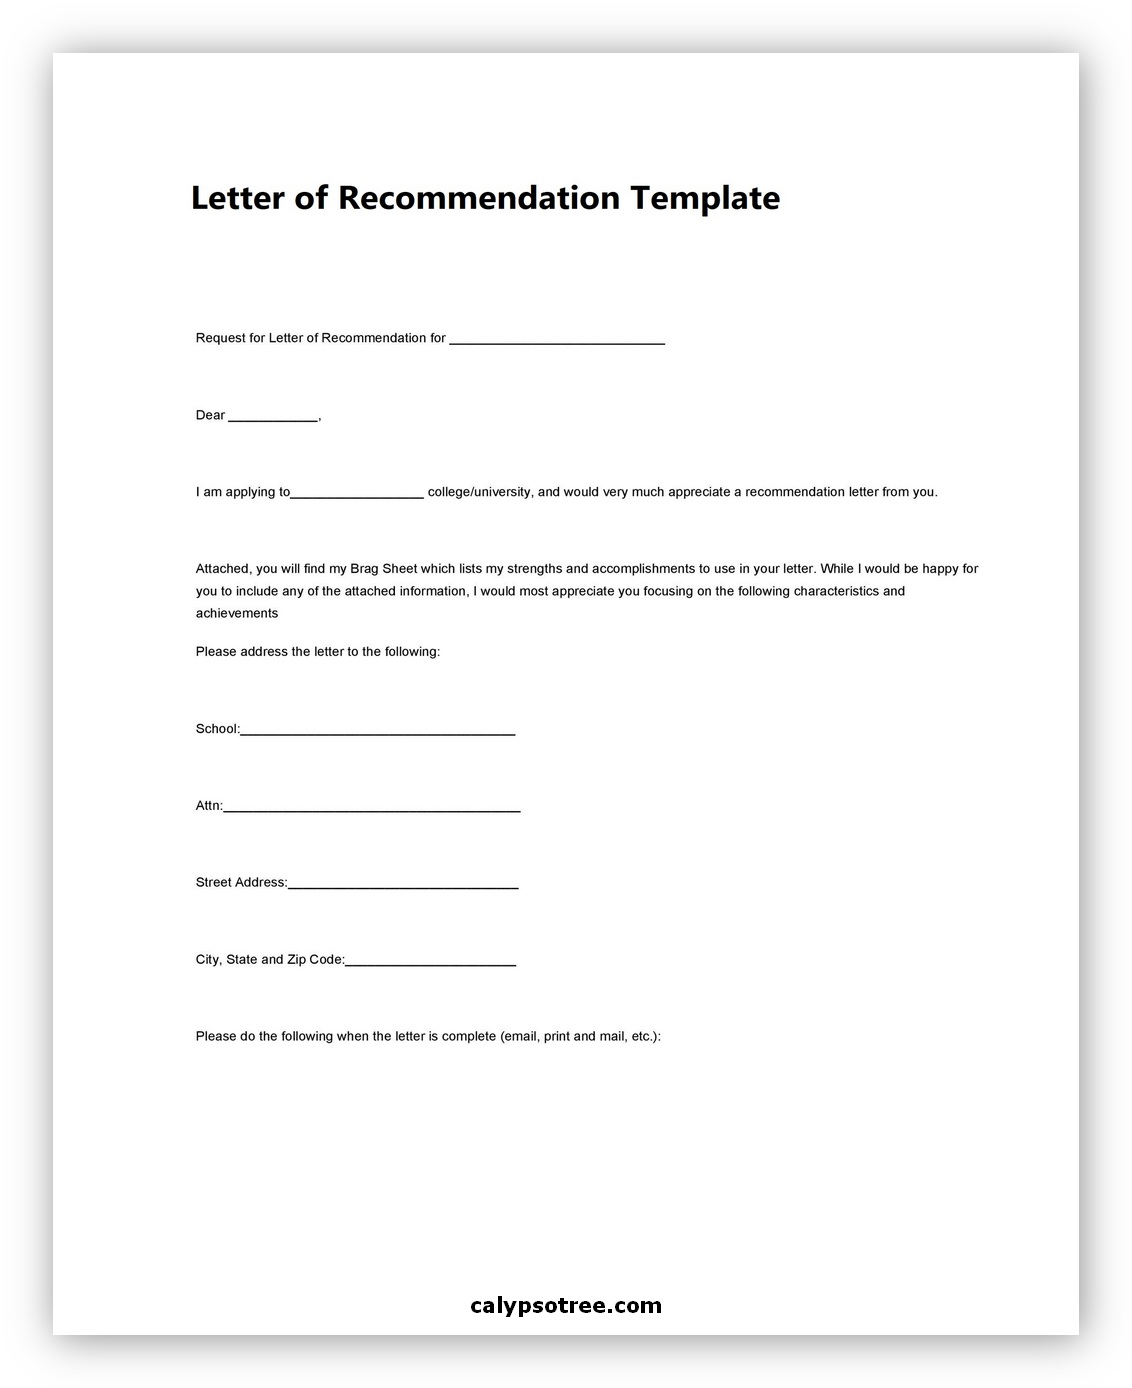 Letter of Recommendation Template 02